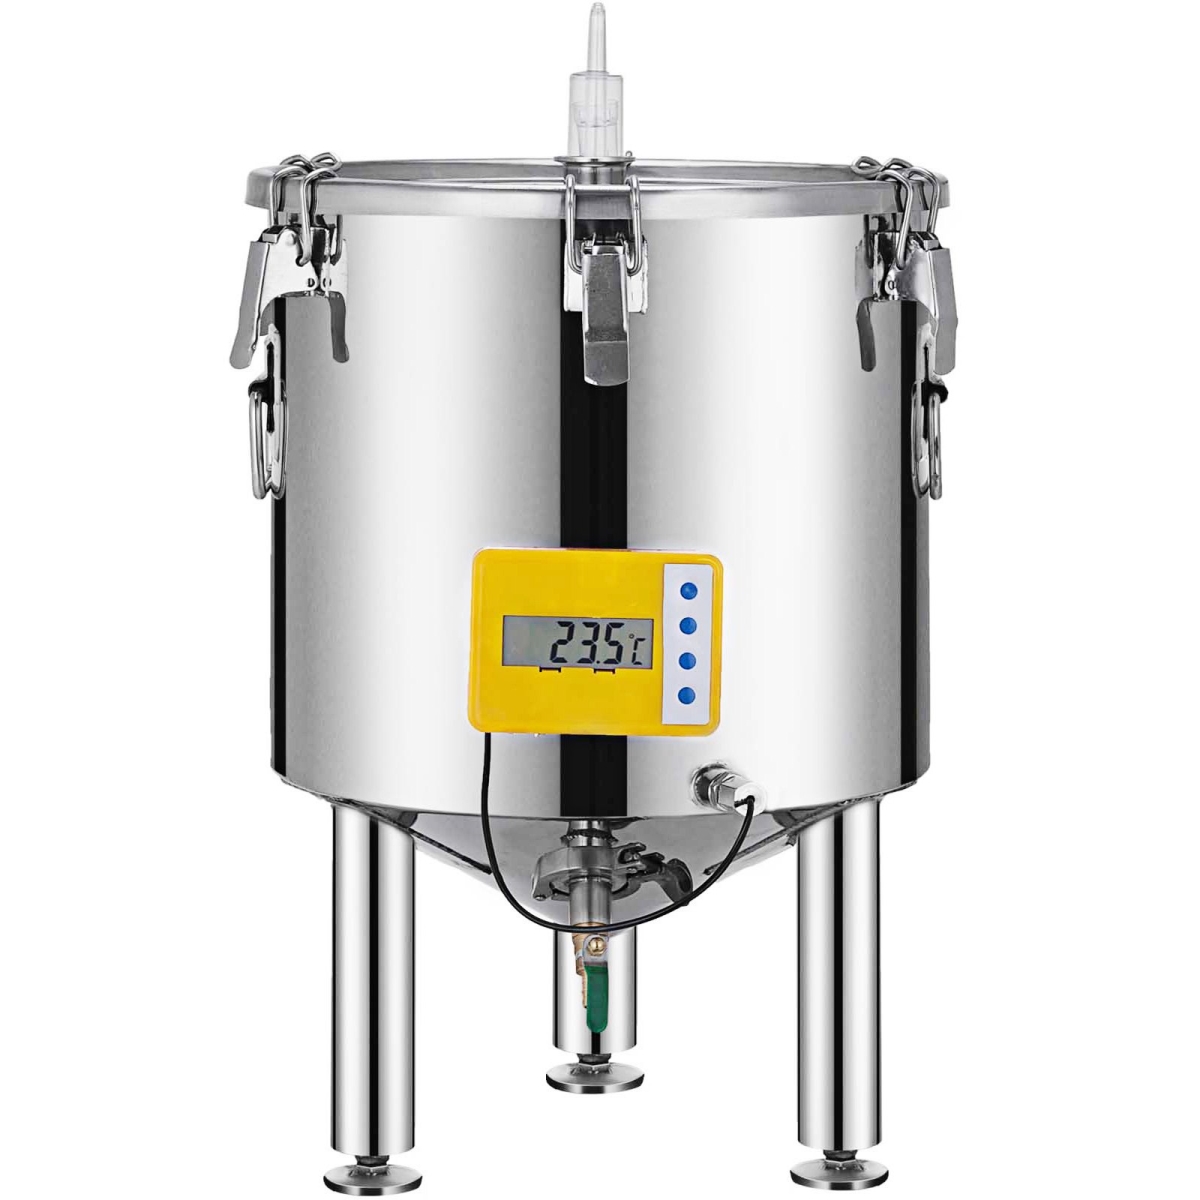 Picture of Vevor JT53L000000000001V0 14 gal Stainless Steel Fermenter Brewing Equipment with Conical Base